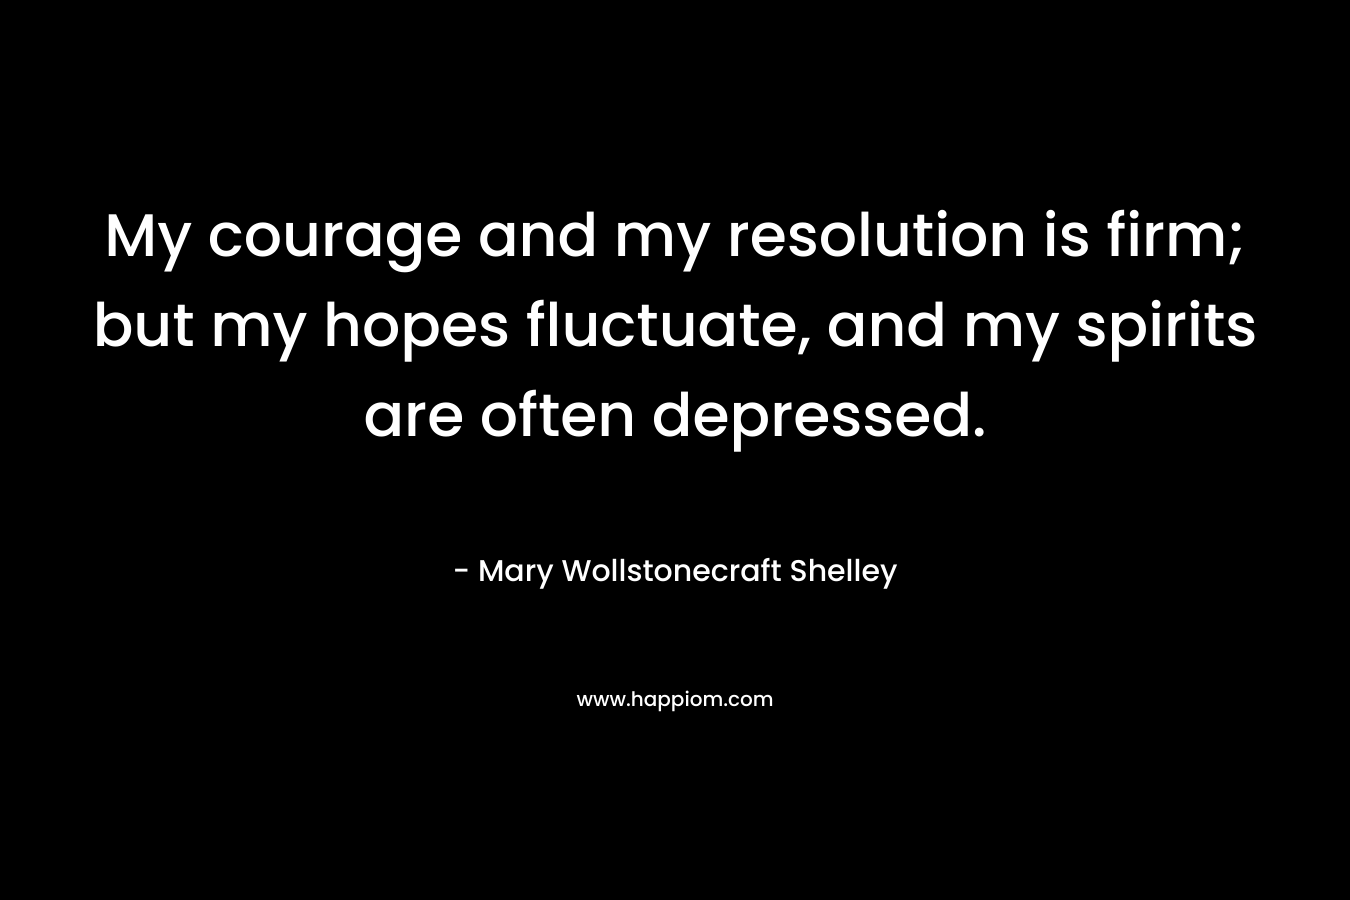 My courage and my resolution is firm; but my hopes fluctuate, and my spirits are often depressed. – Mary Wollstonecraft Shelley